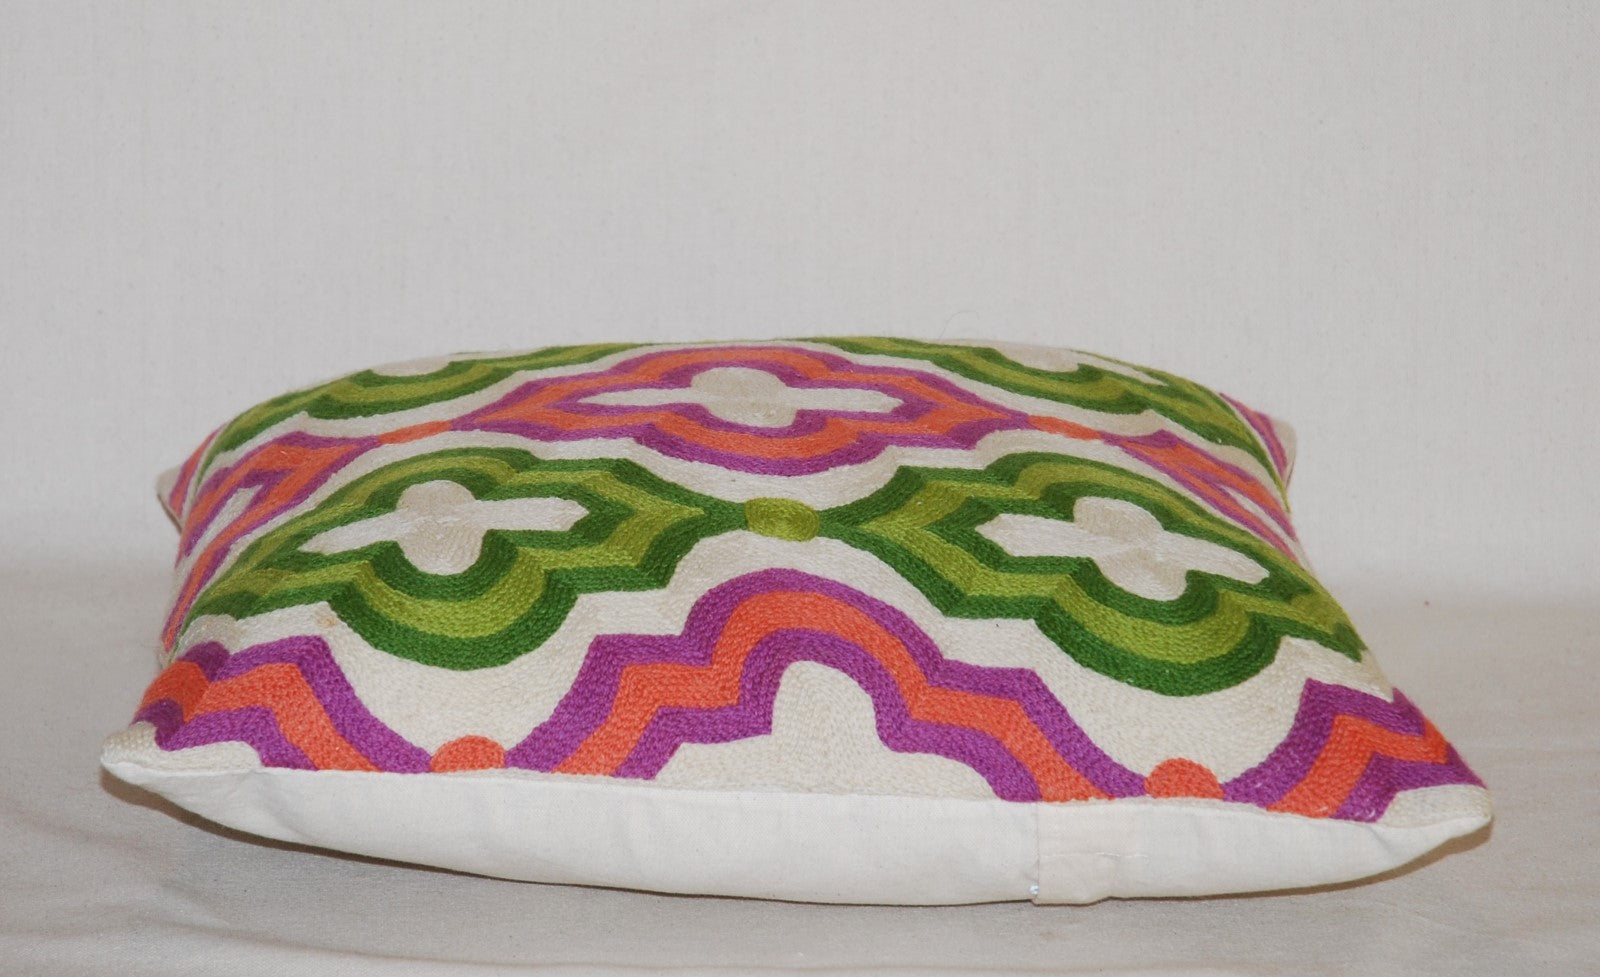 Crewel Embroidery Throw Pillow Cushion Cover, Pink and Green #CW-1104